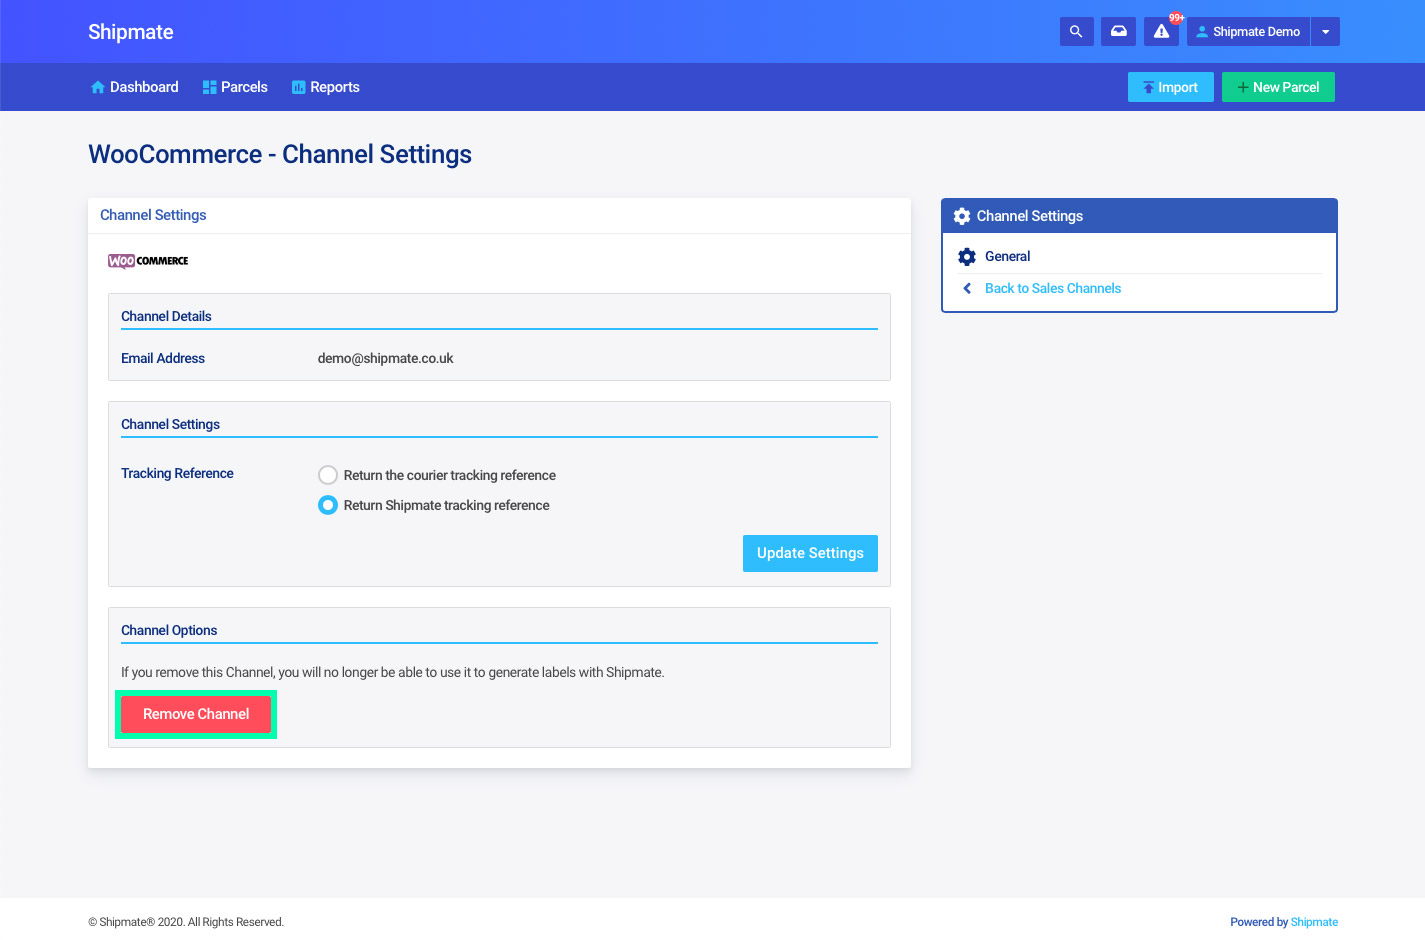 Shipmate - WooCommerce - Remove Channel